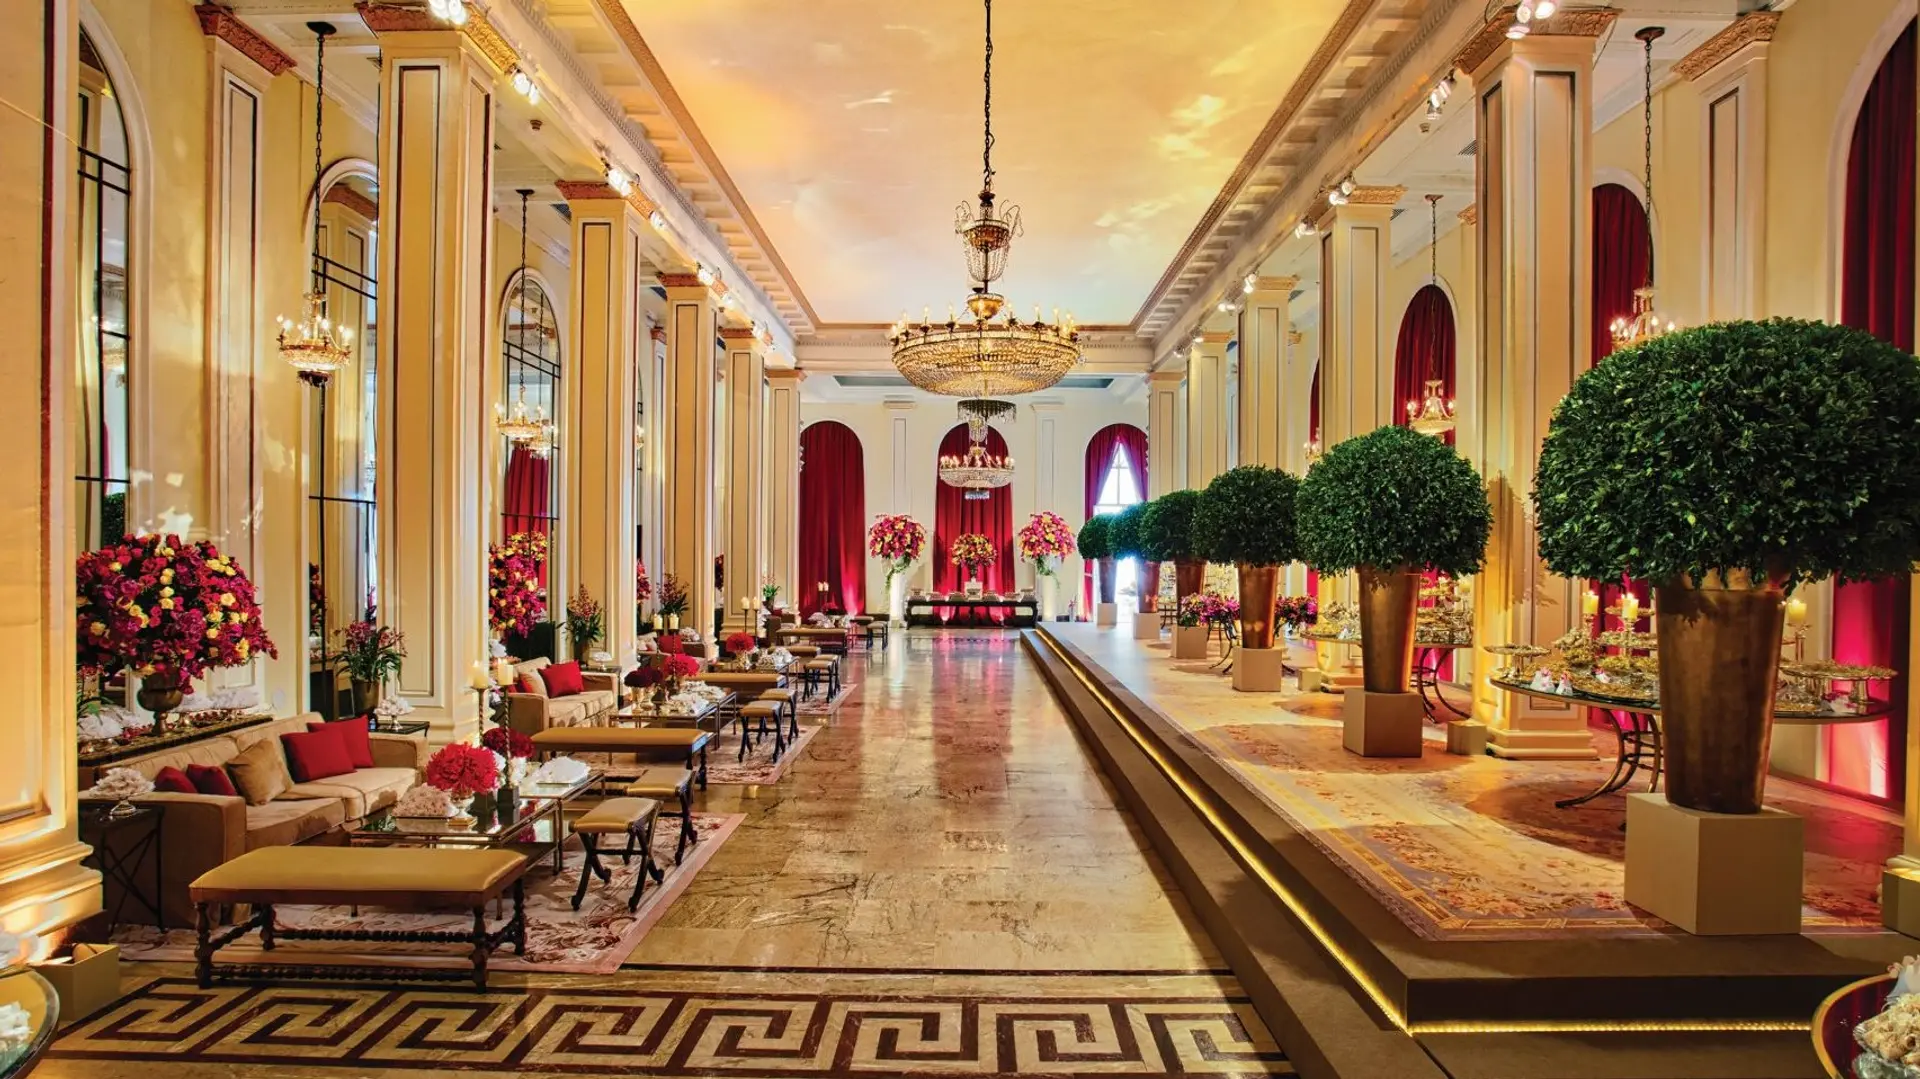 Hotel review What We Love' - Copacabana Palace - a Belmond Hotel - 1